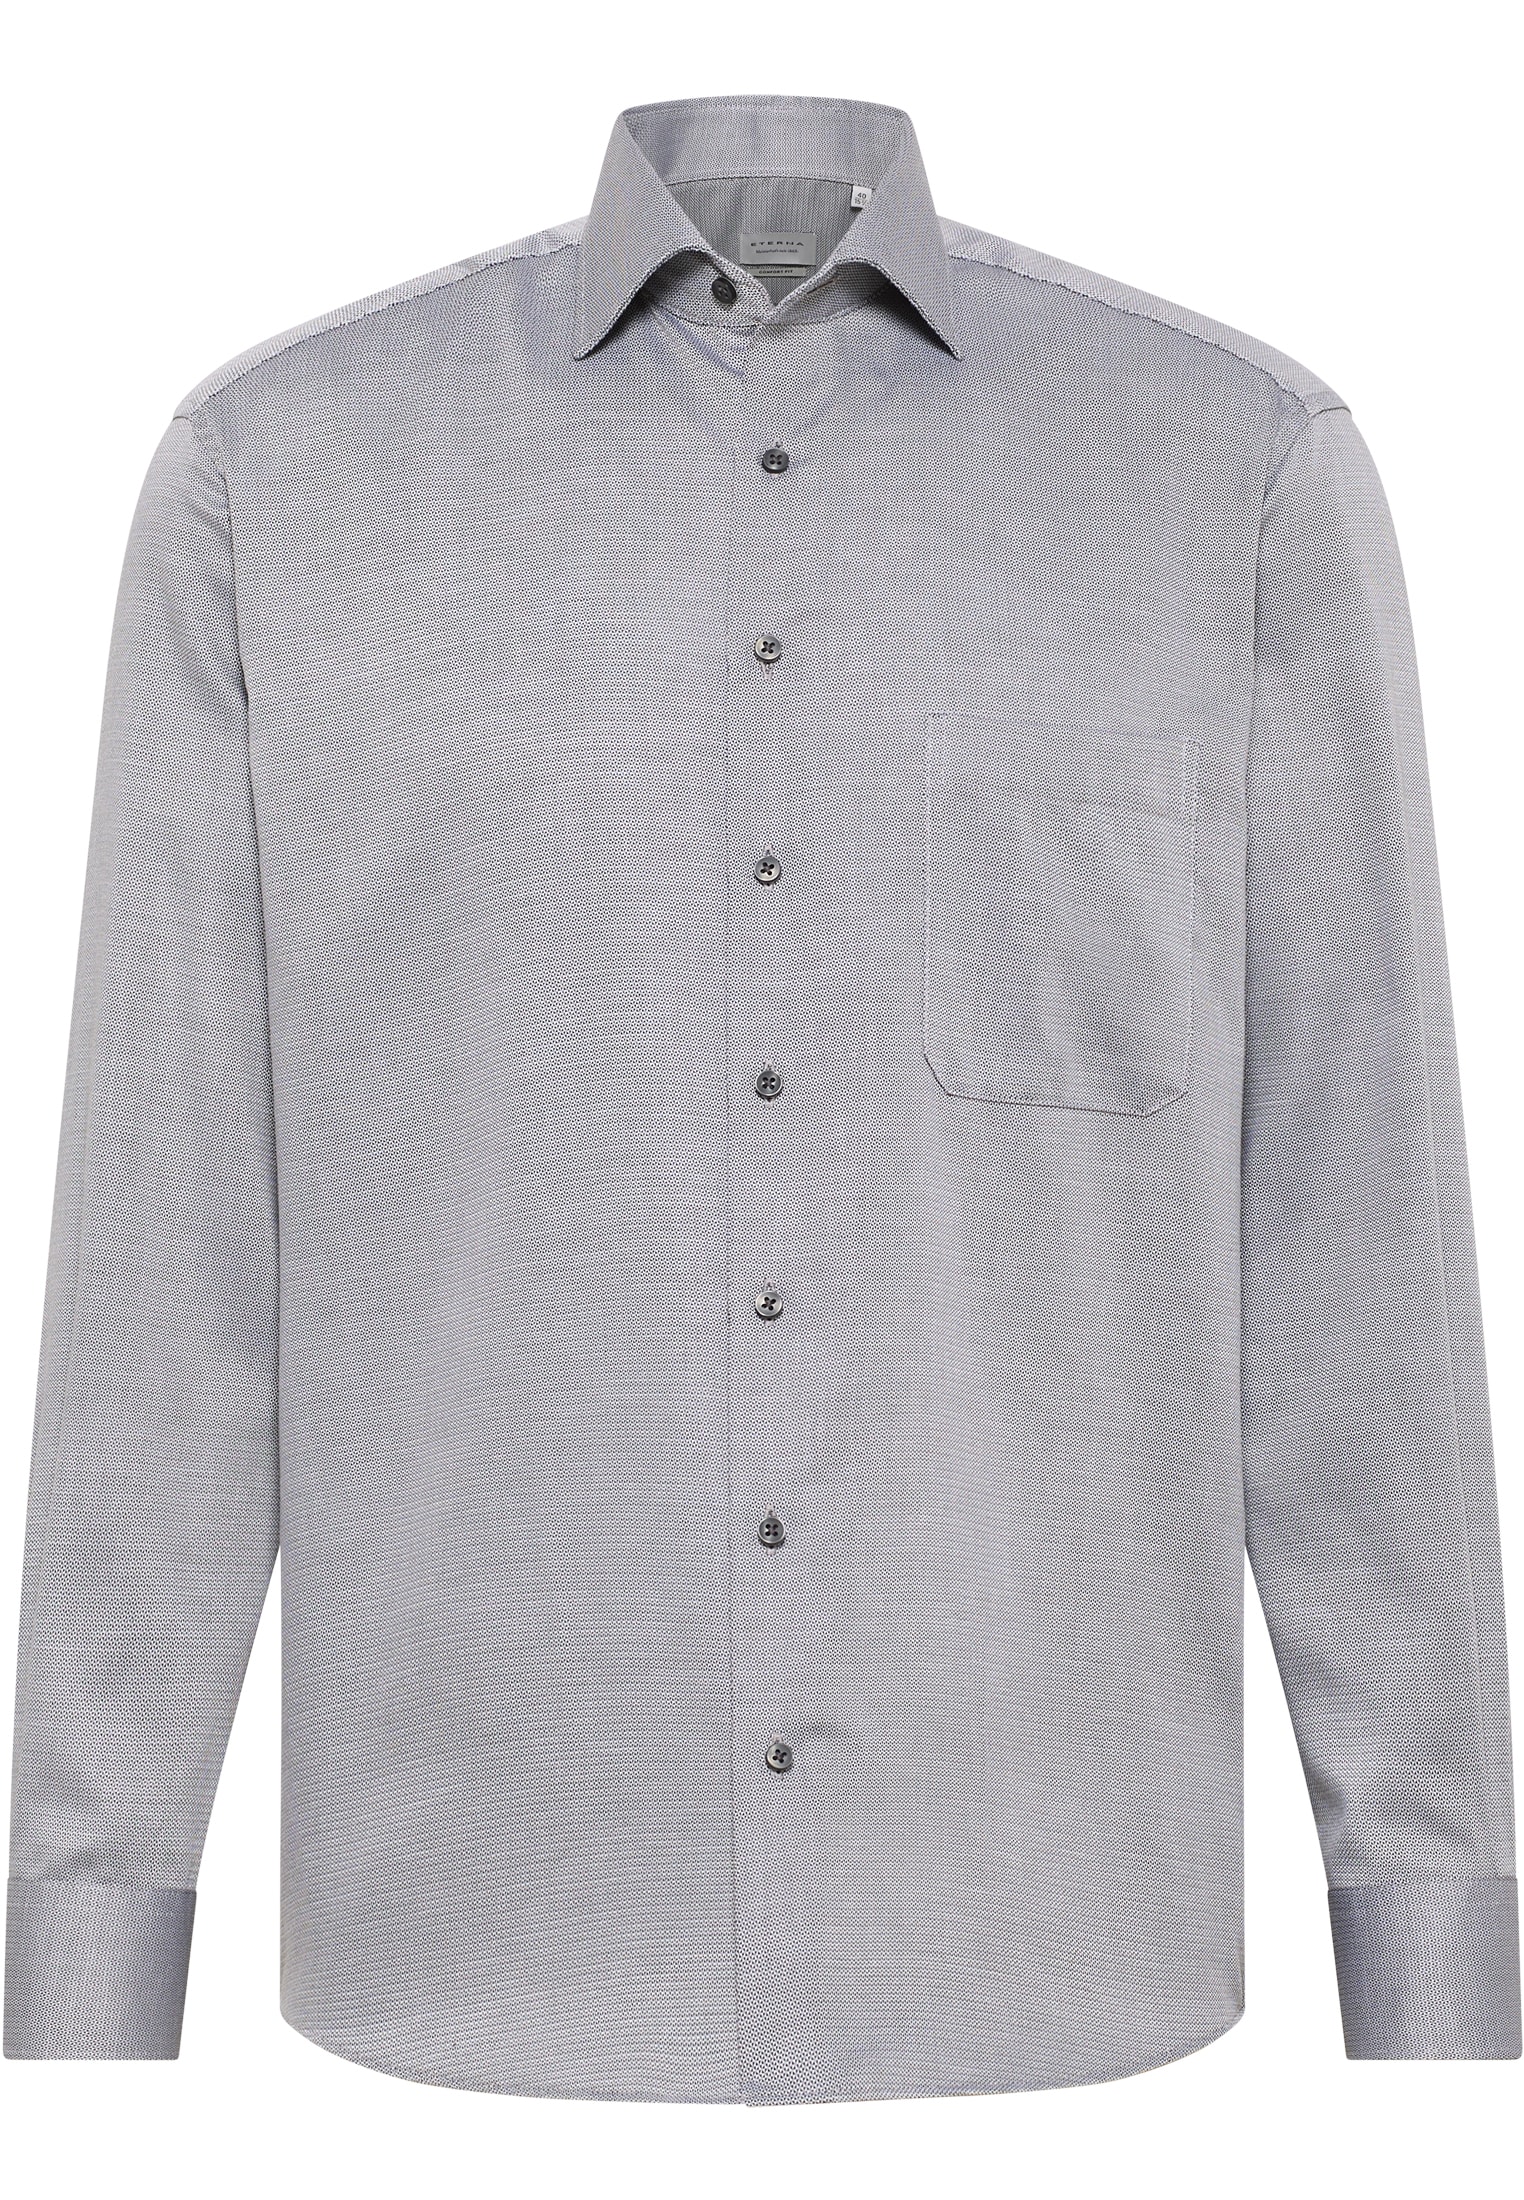 COMFORT FIT Shirt in anthracite structured